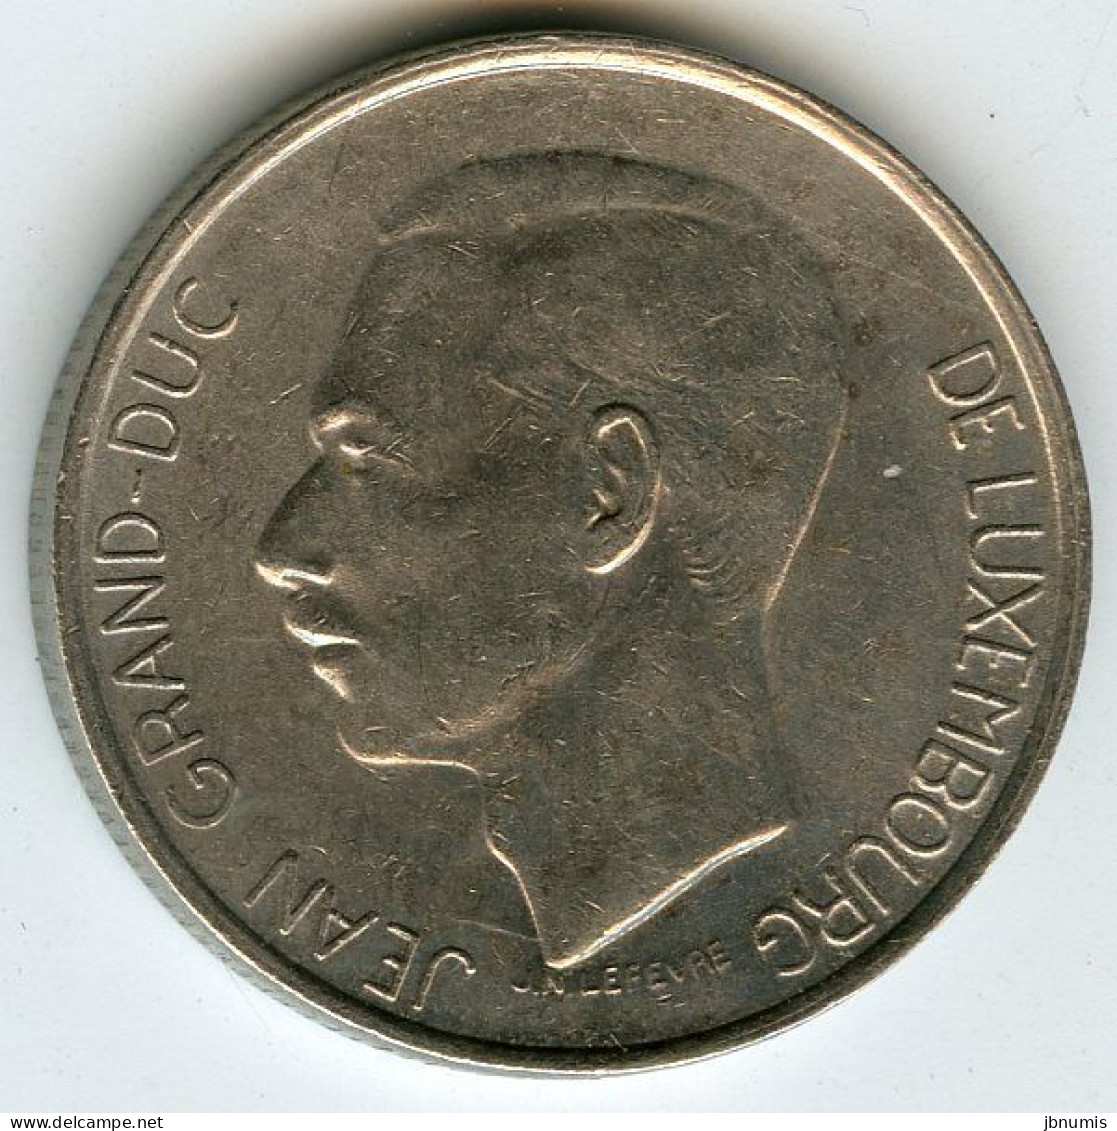 Luxembourg 5 Francs 1979 KM 56 - Luxembourg